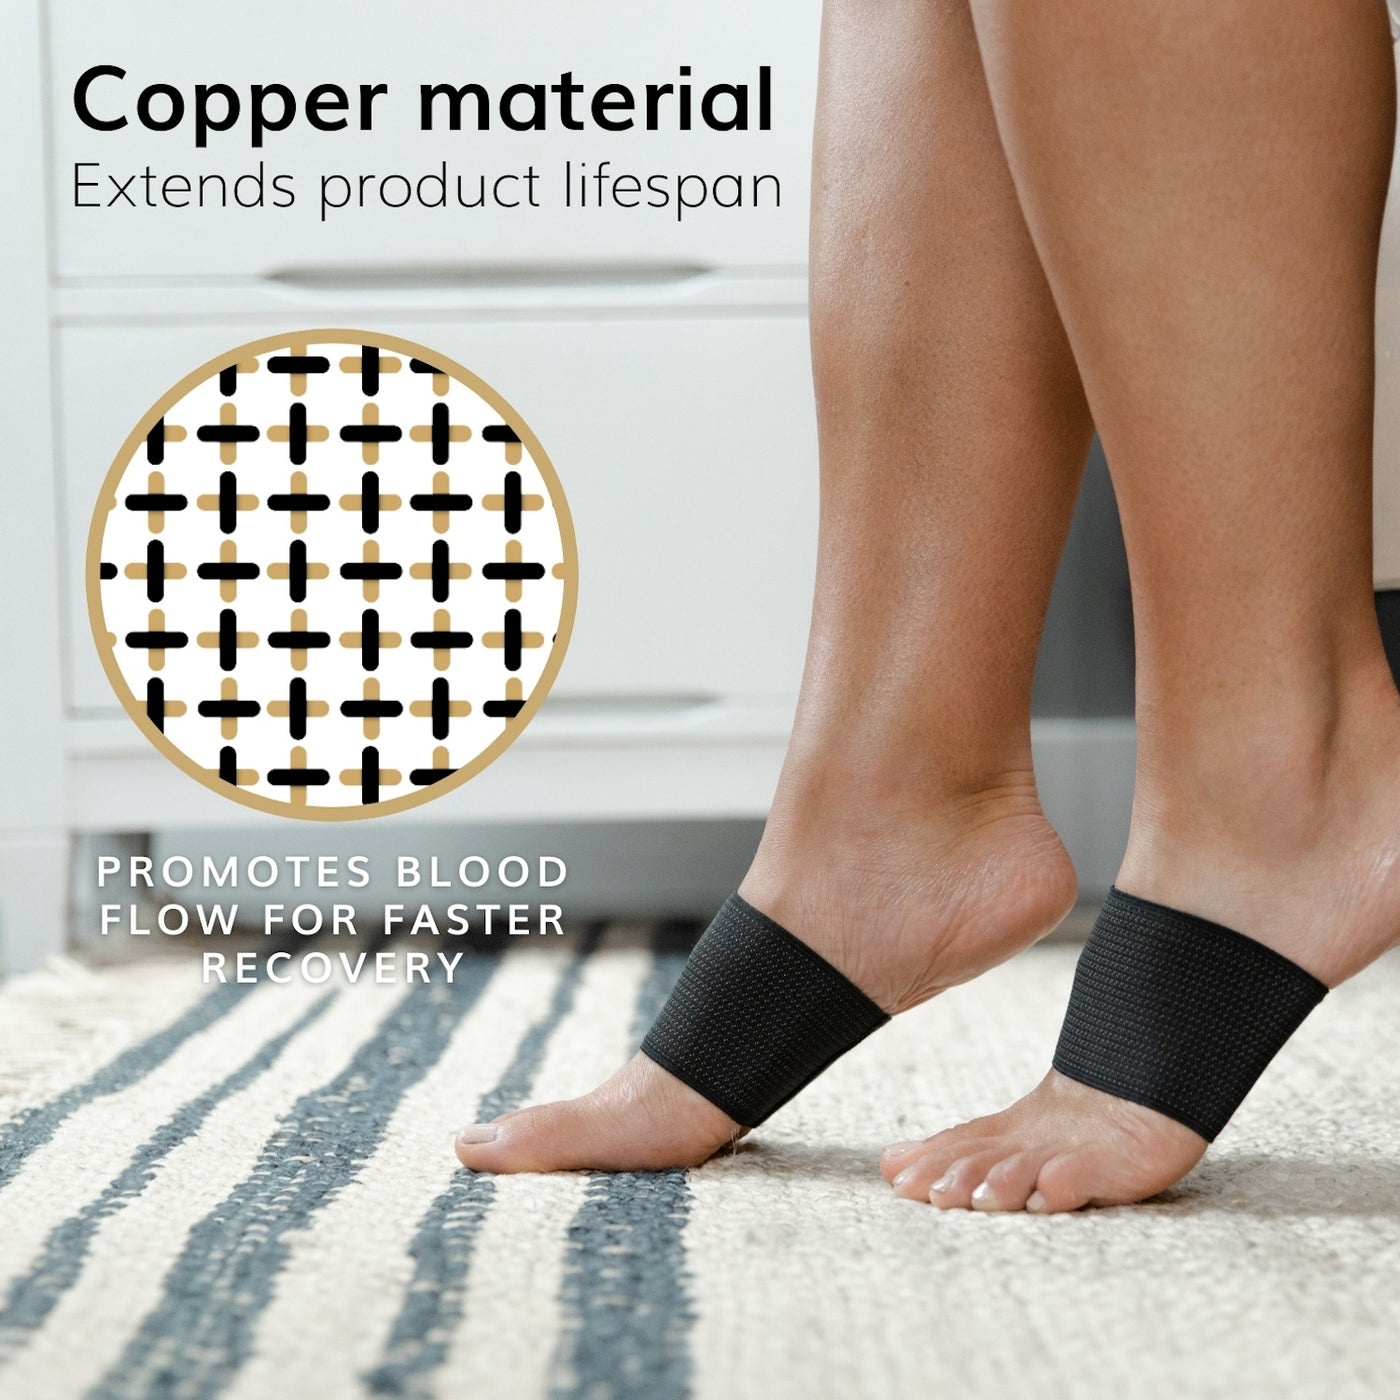 Our arch sleeves are copper infused to help extend the products lifespan and reduce odor